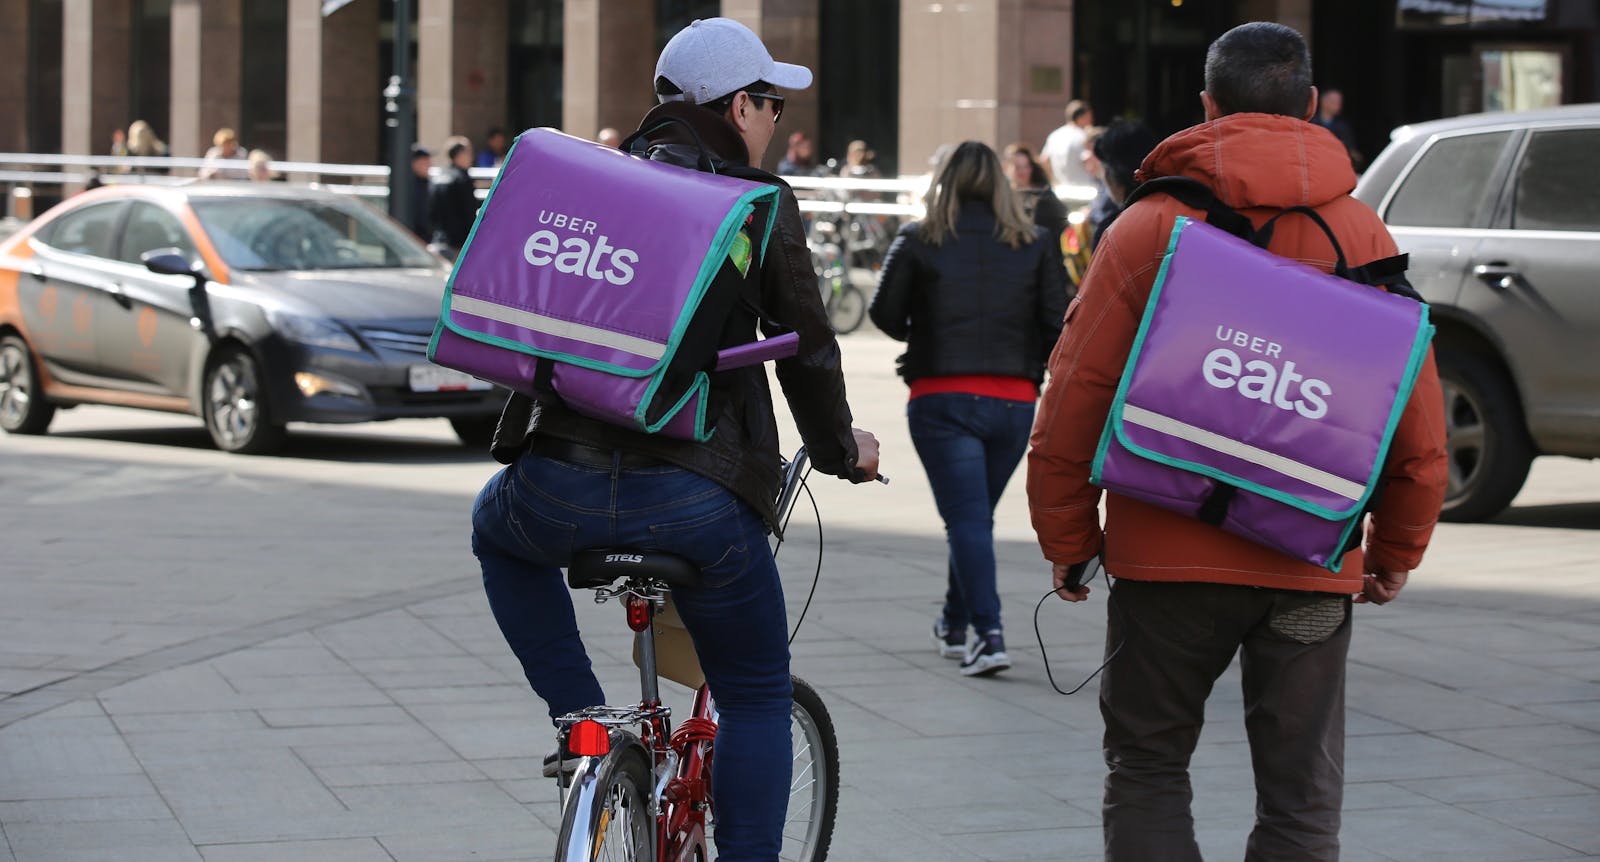 Uber Eats delivery people in Moscow. Photo by Bloomberg